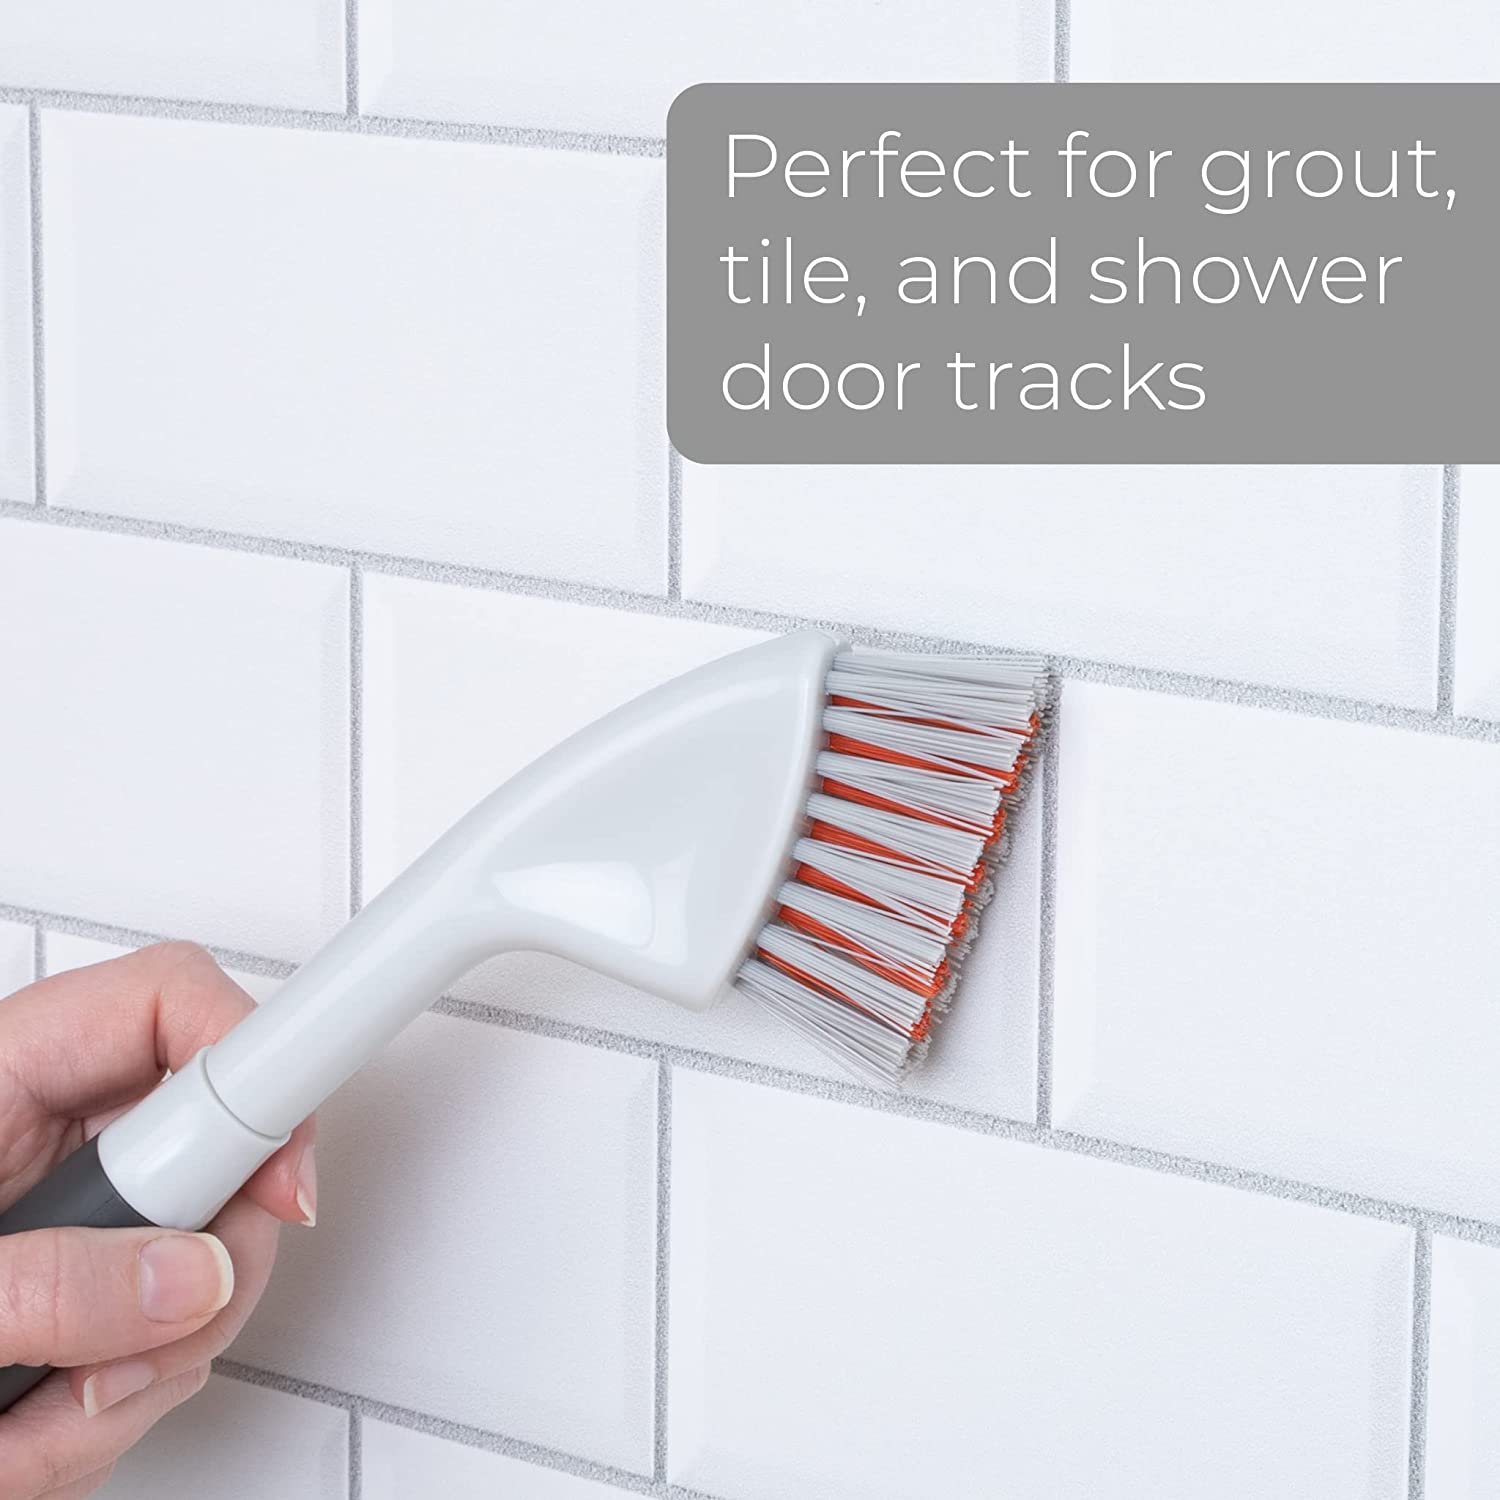 https://cdn.shopify.com/s/files/1/2393/7799/products/non-scratch-grout-brush-smart-design-cleaning-7001201-incrementing-number-632552.jpg?v=1679339659